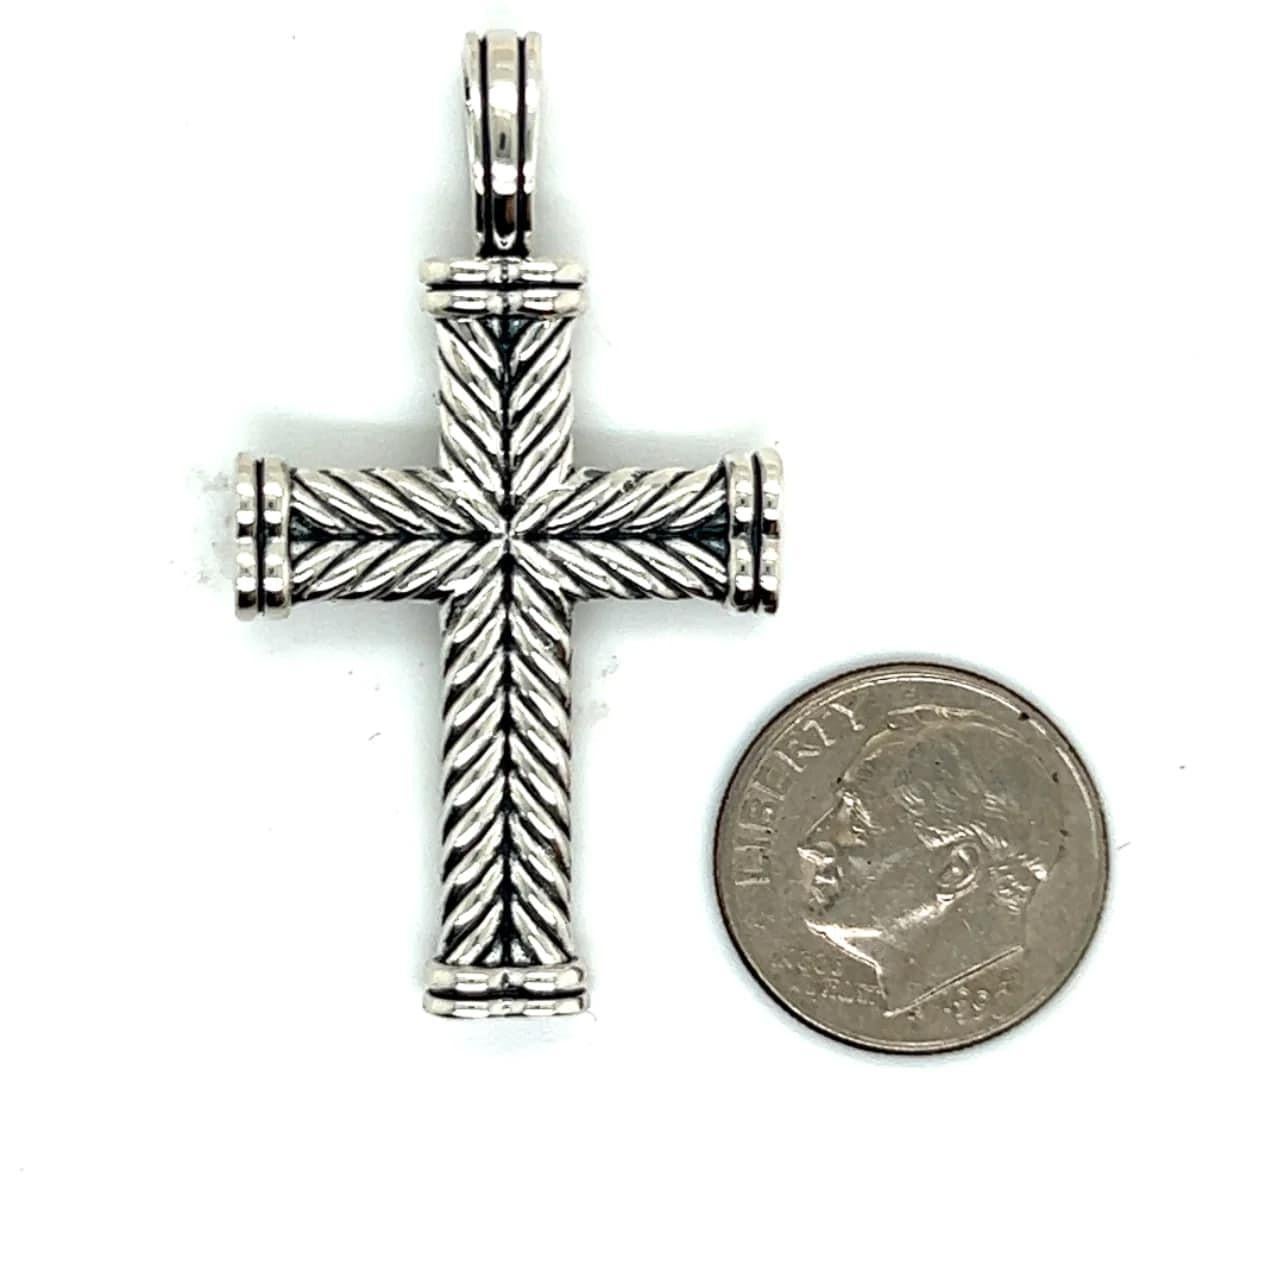 Authentic David Yurman Estate Chevron Silver Cross Pendant DY340

Retail: $395.00

This elegant Authentic David Yurman cross pendant is made of sterling silver.

TRUSTED SELLER SINCE 2002

PLEASE SEE OUR HUNDREDS OF POSITIVE FEEDBACKS FROM OUR